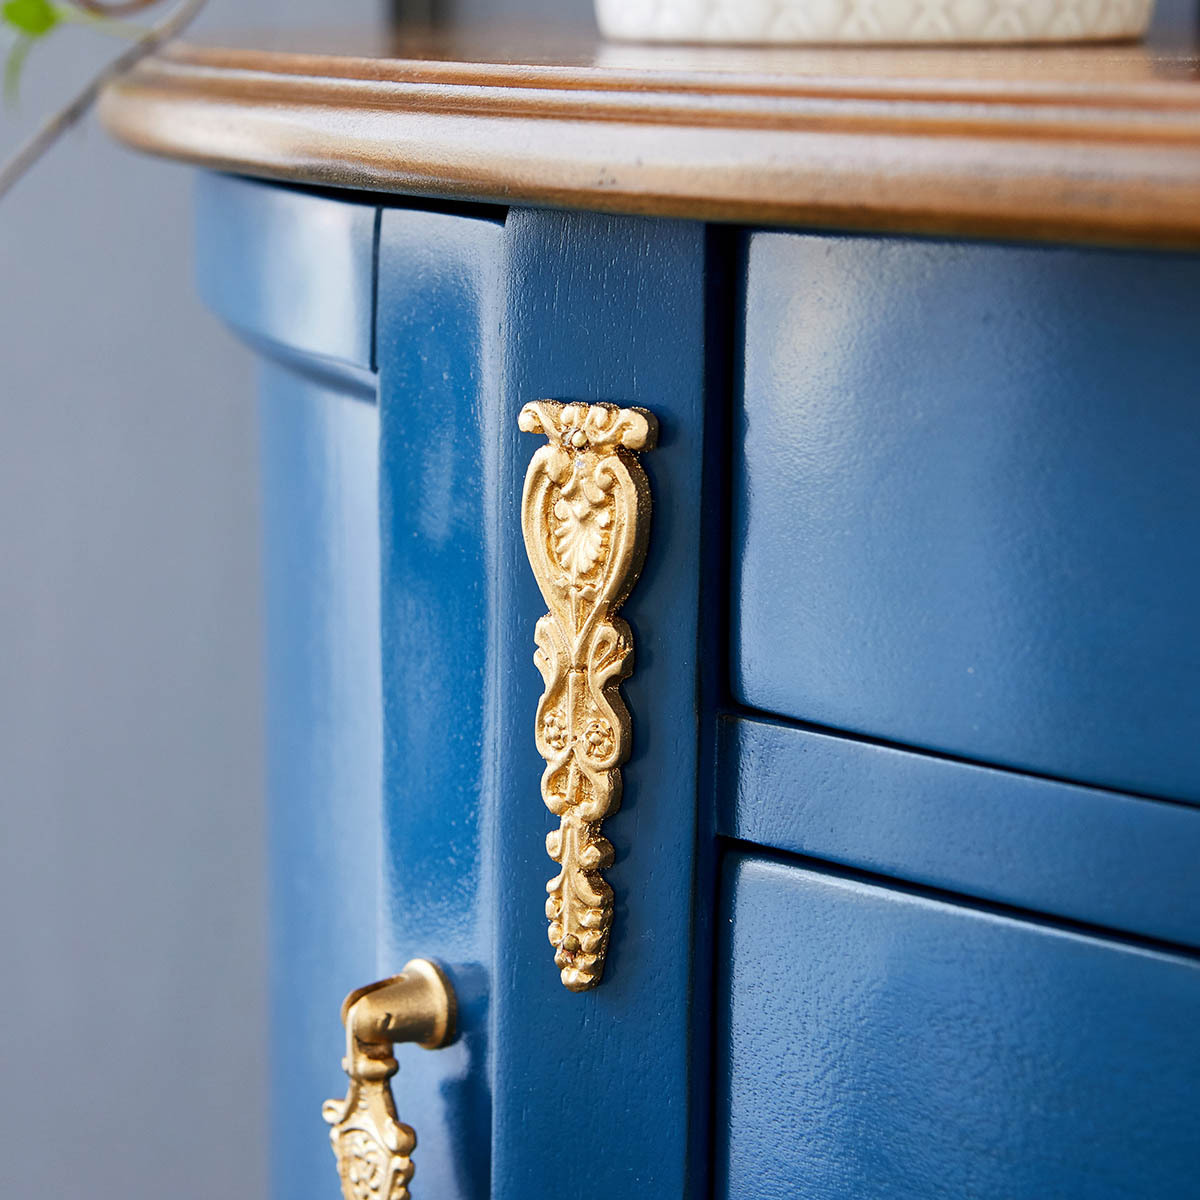 Bandal French Antique Console - Blue